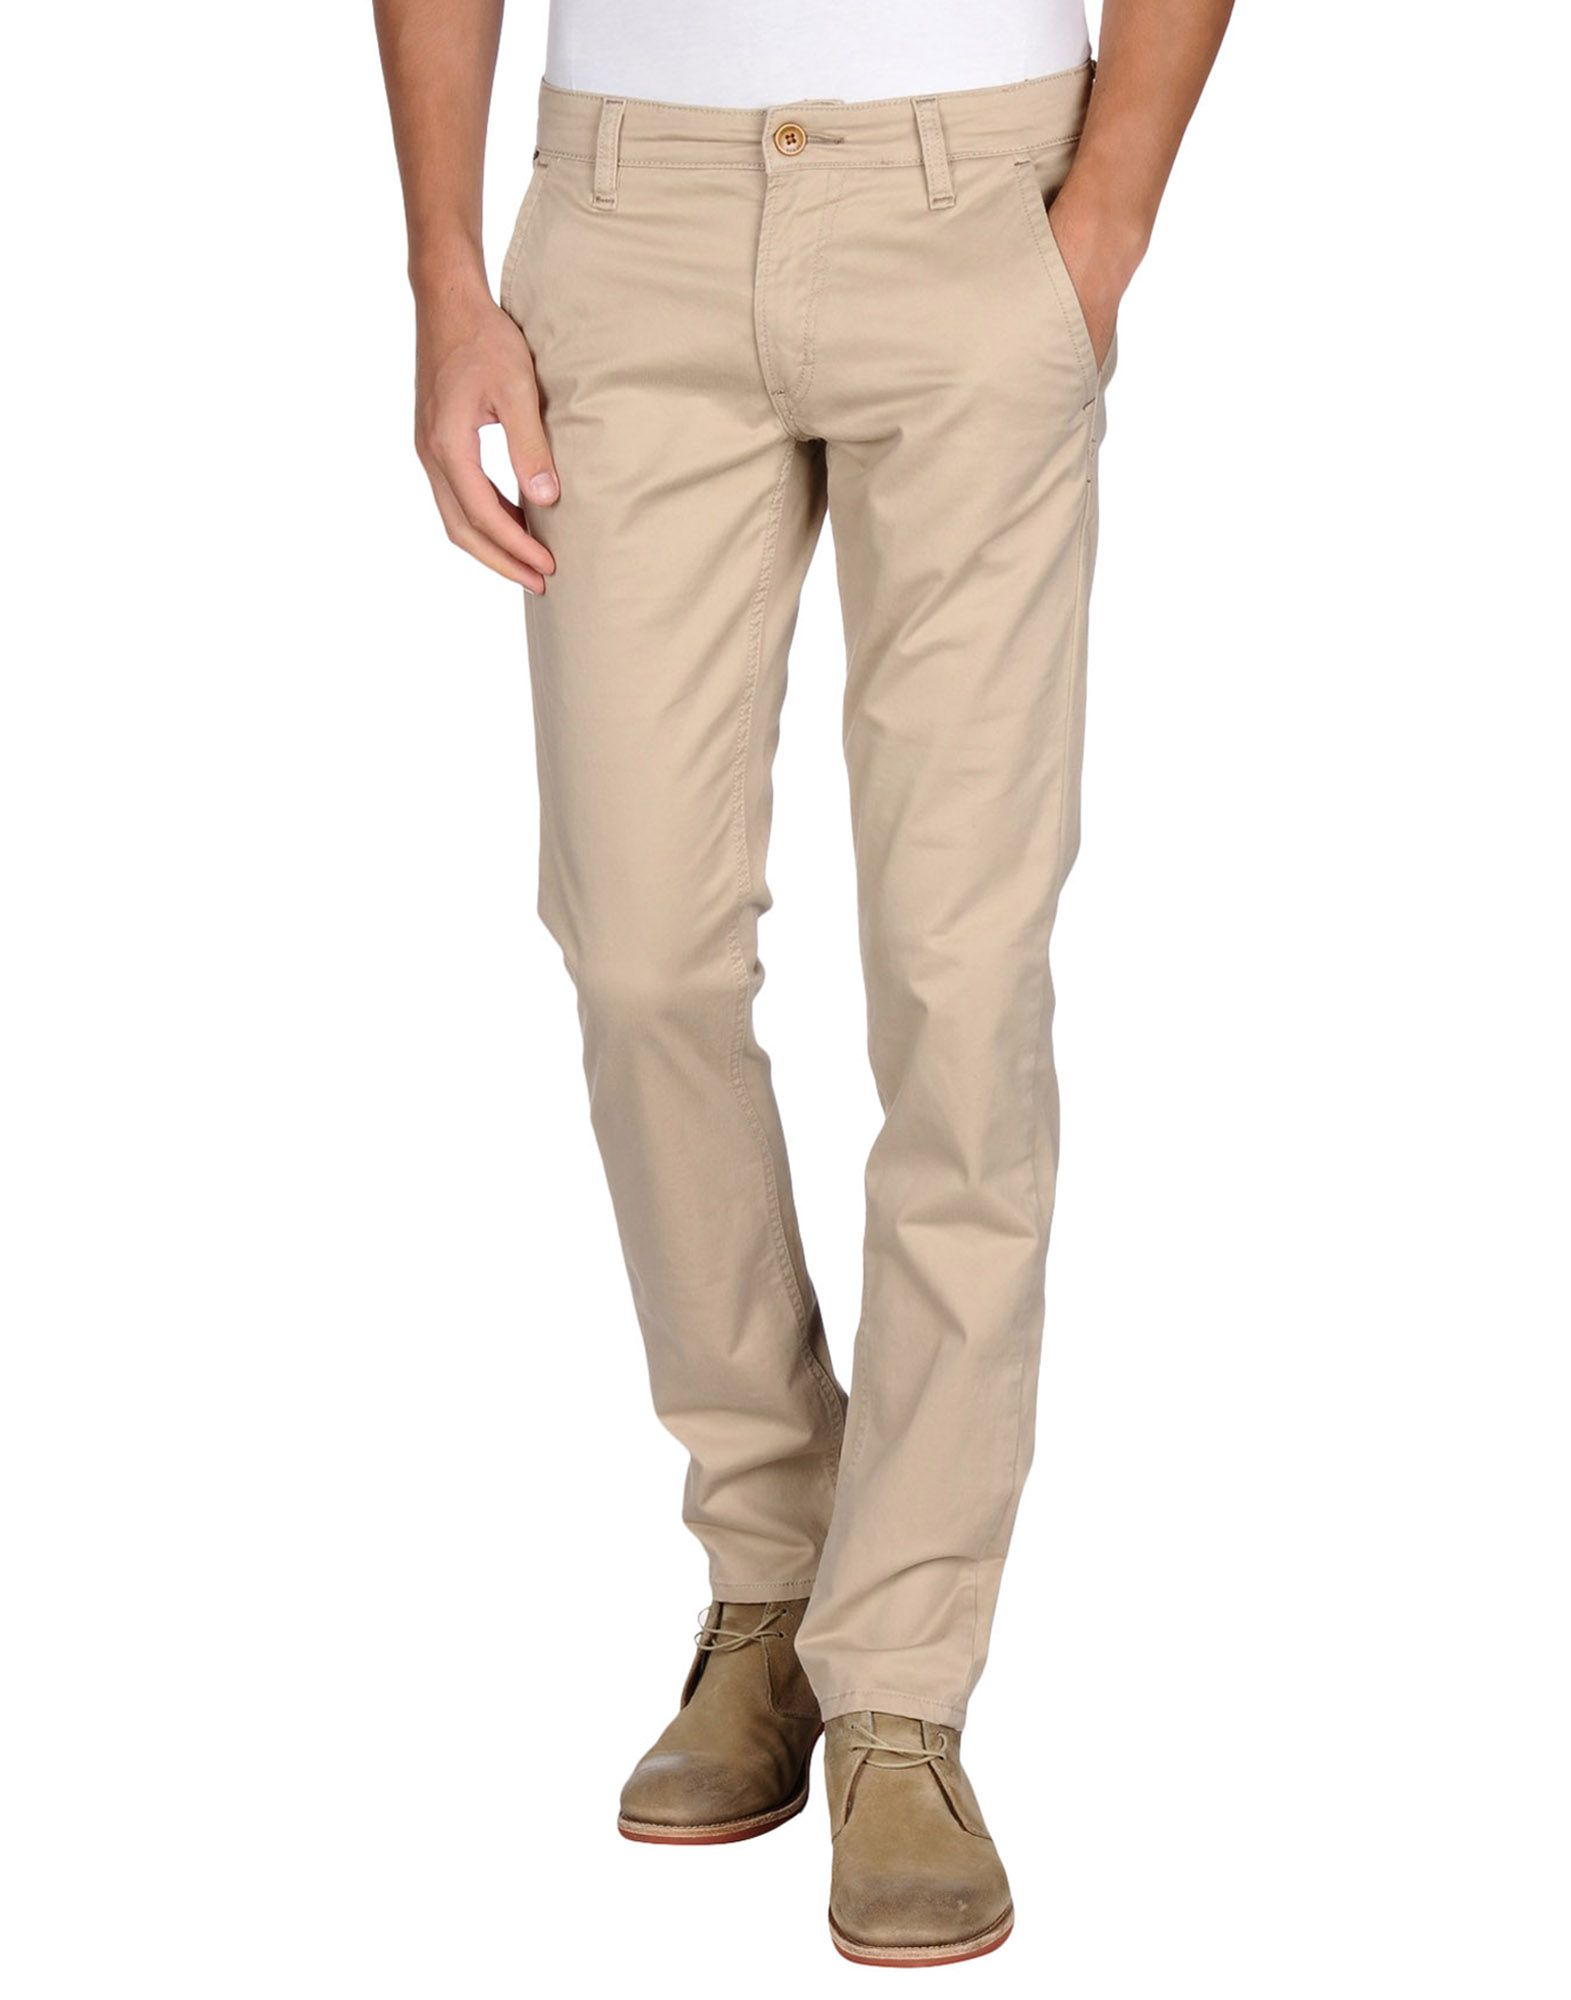 Lyst - Guess Casual Trouser in Natural for Men